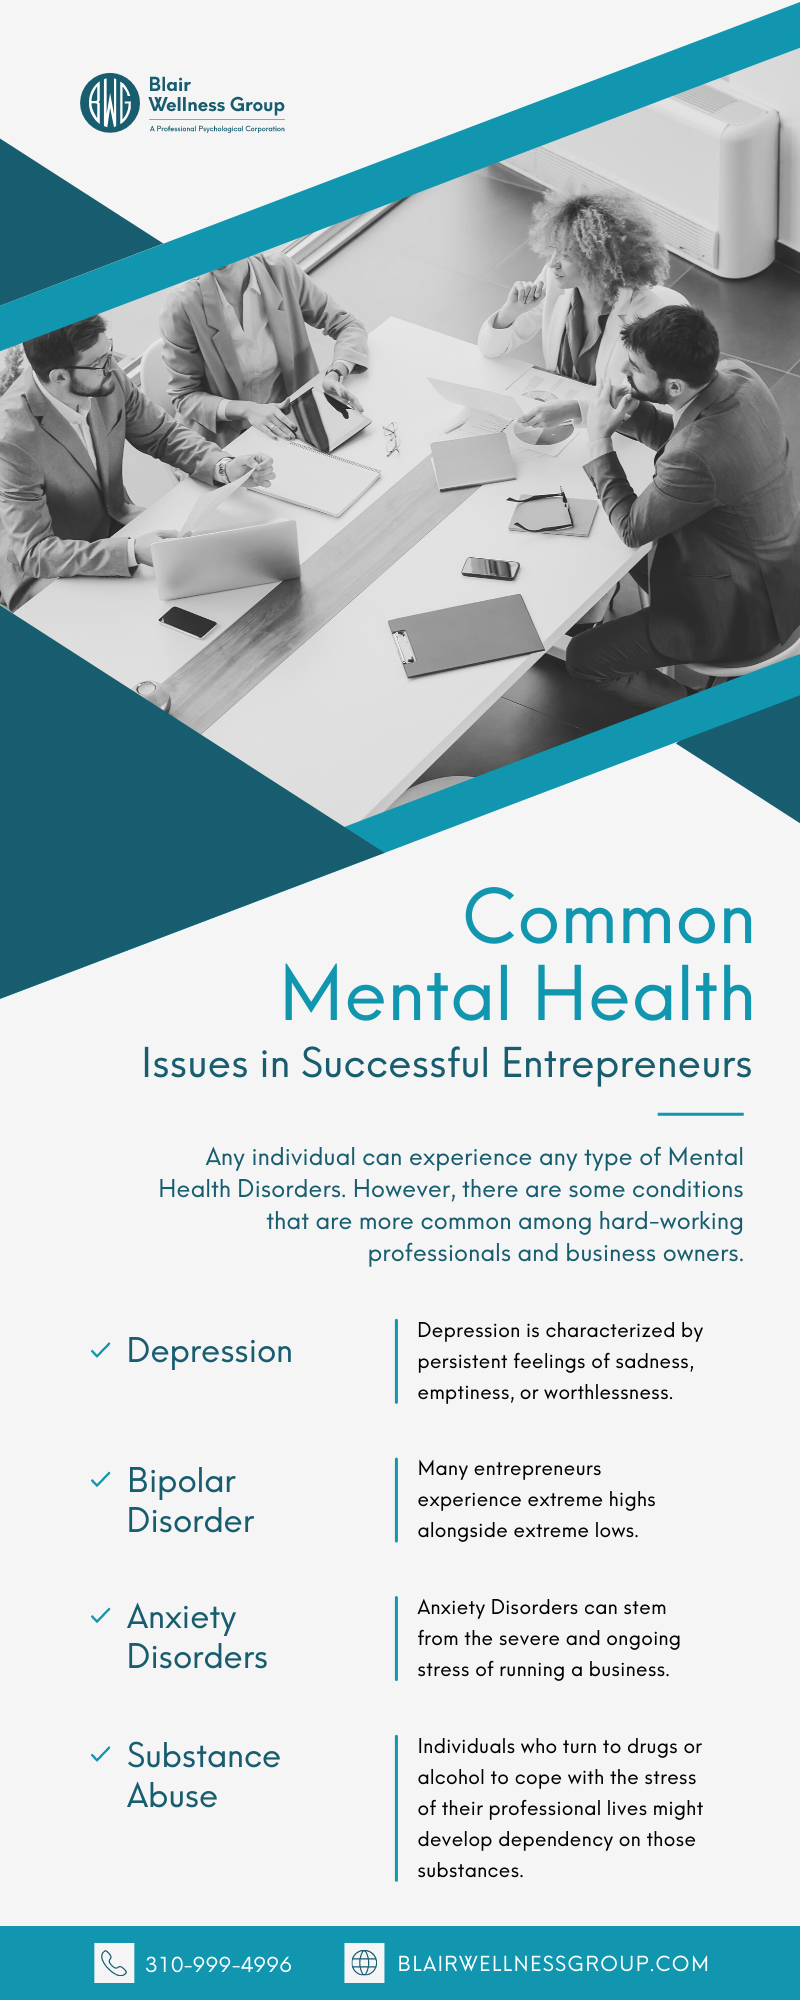 Common Mental Health Issues in Successful Entrepreneurs